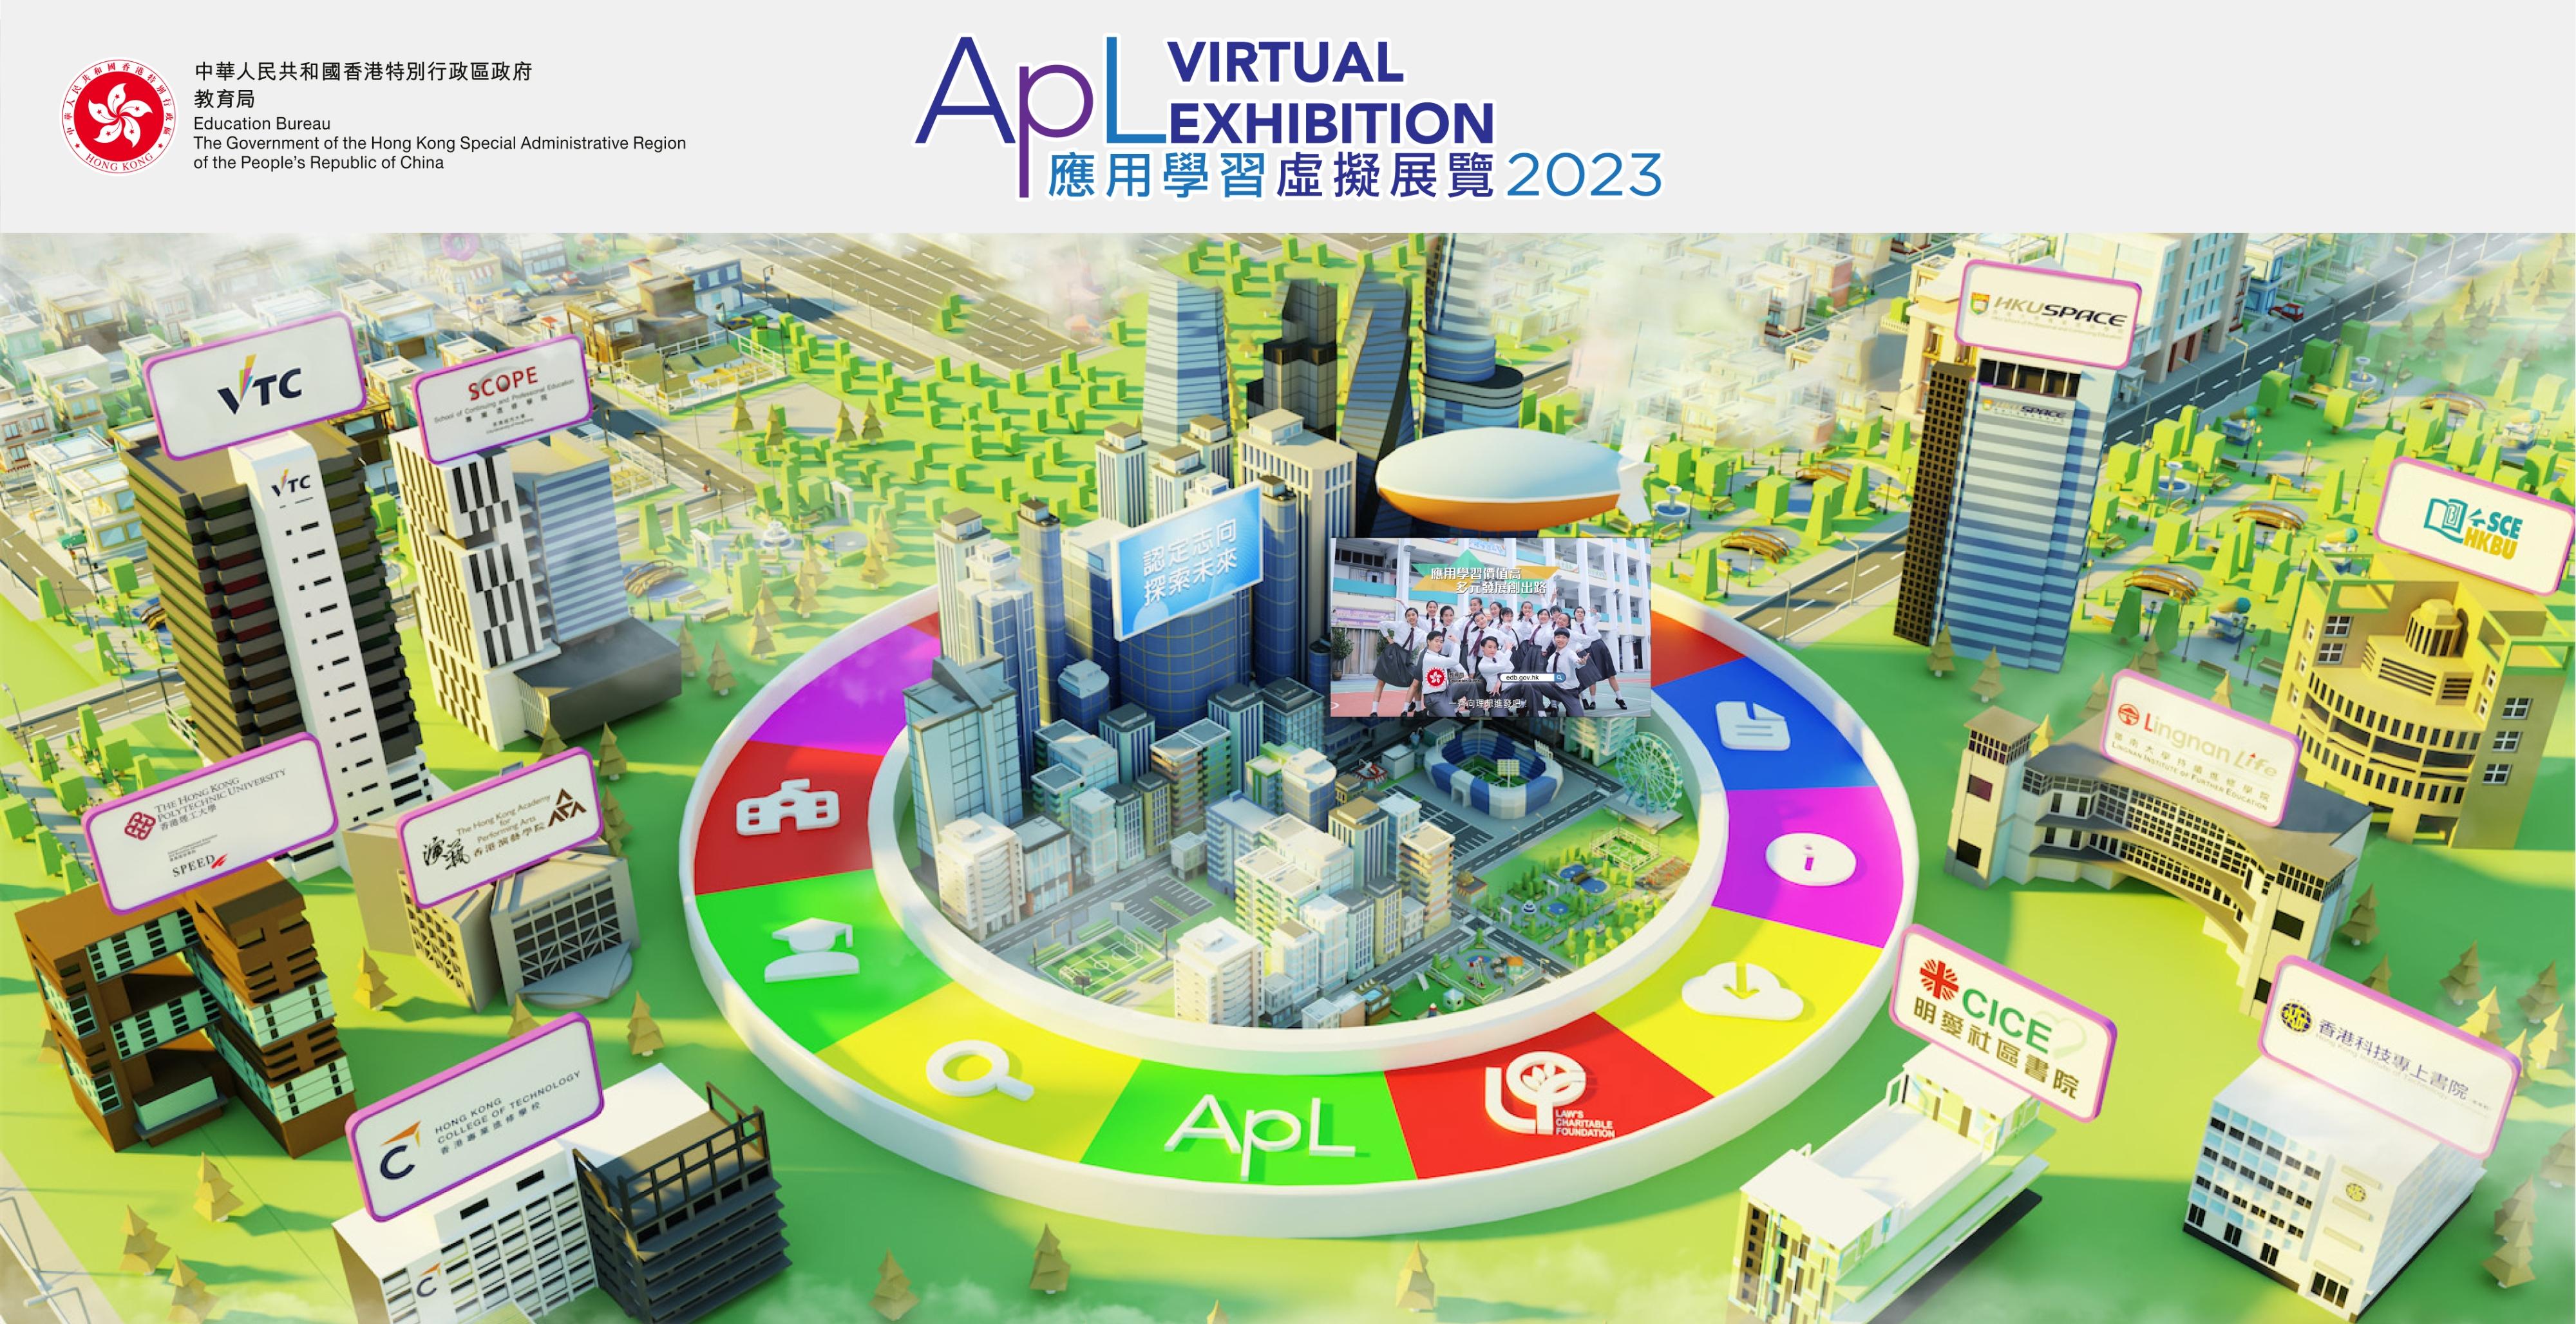 Jointly organised by the Education Bureau and Applied Learning course providers, the "Applied Learning Virtual Exhibition 2023", is launched today (May 17) and will be held until May 31, 2024, via an online platform.